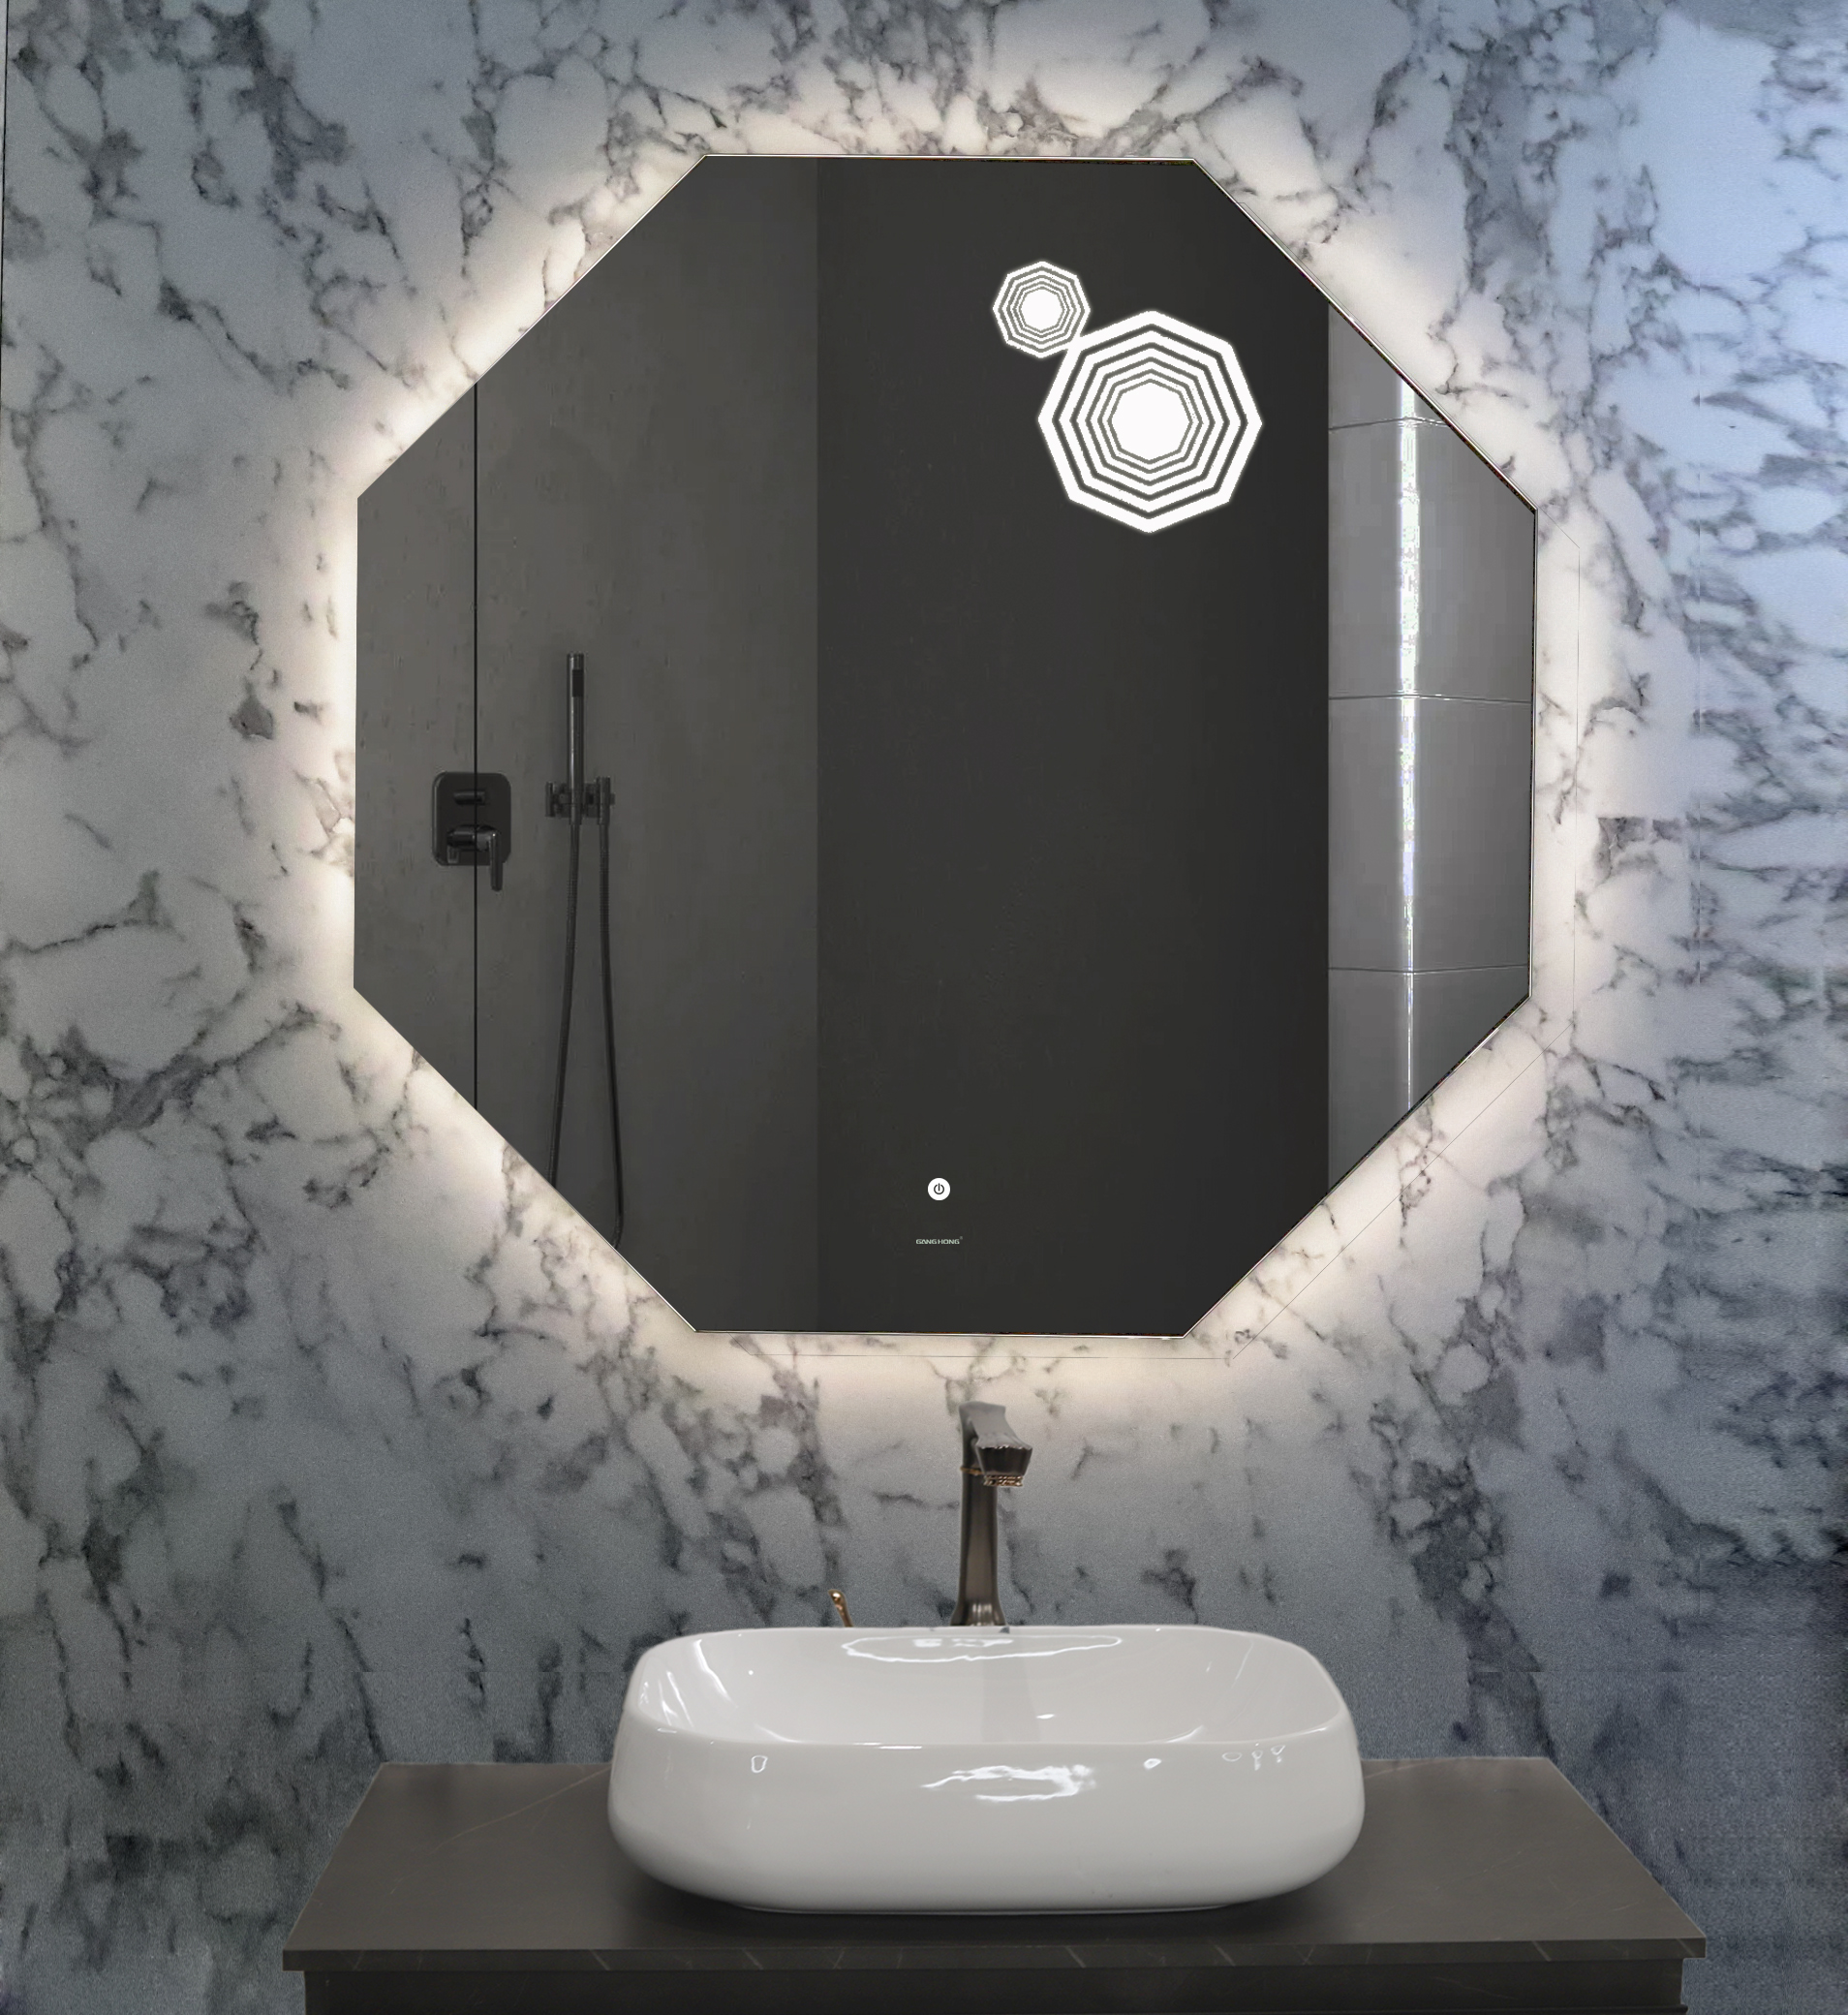 The bathroom as a space for living - Domus